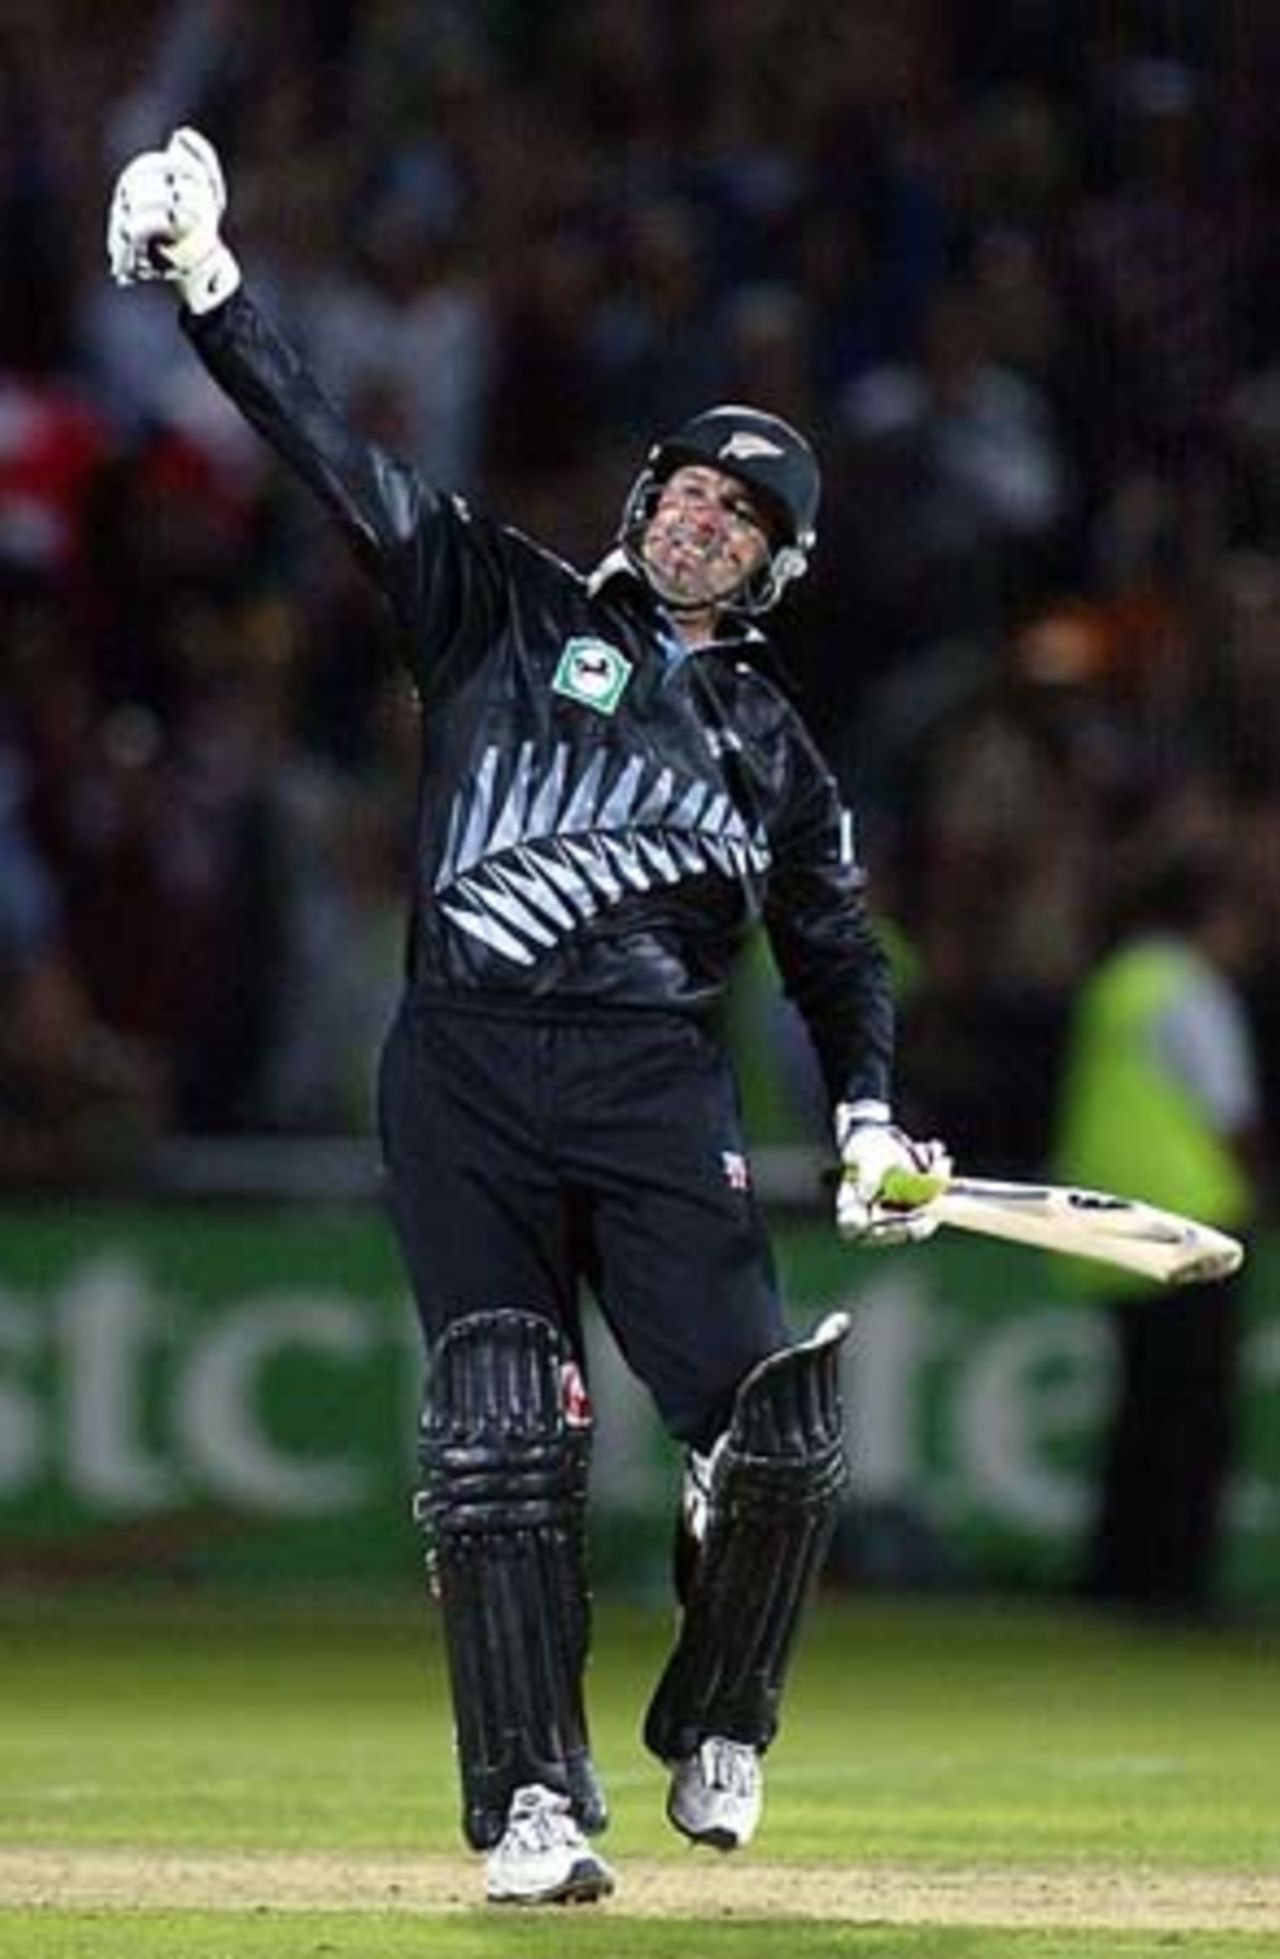 New Zealand batsman Nathan Astle punches the air to celebrate reaching his century. Astle went on to score 122 not out. 5th ODI: New Zealand v England at Carisbrook, Dunedin, 26 February 2002.